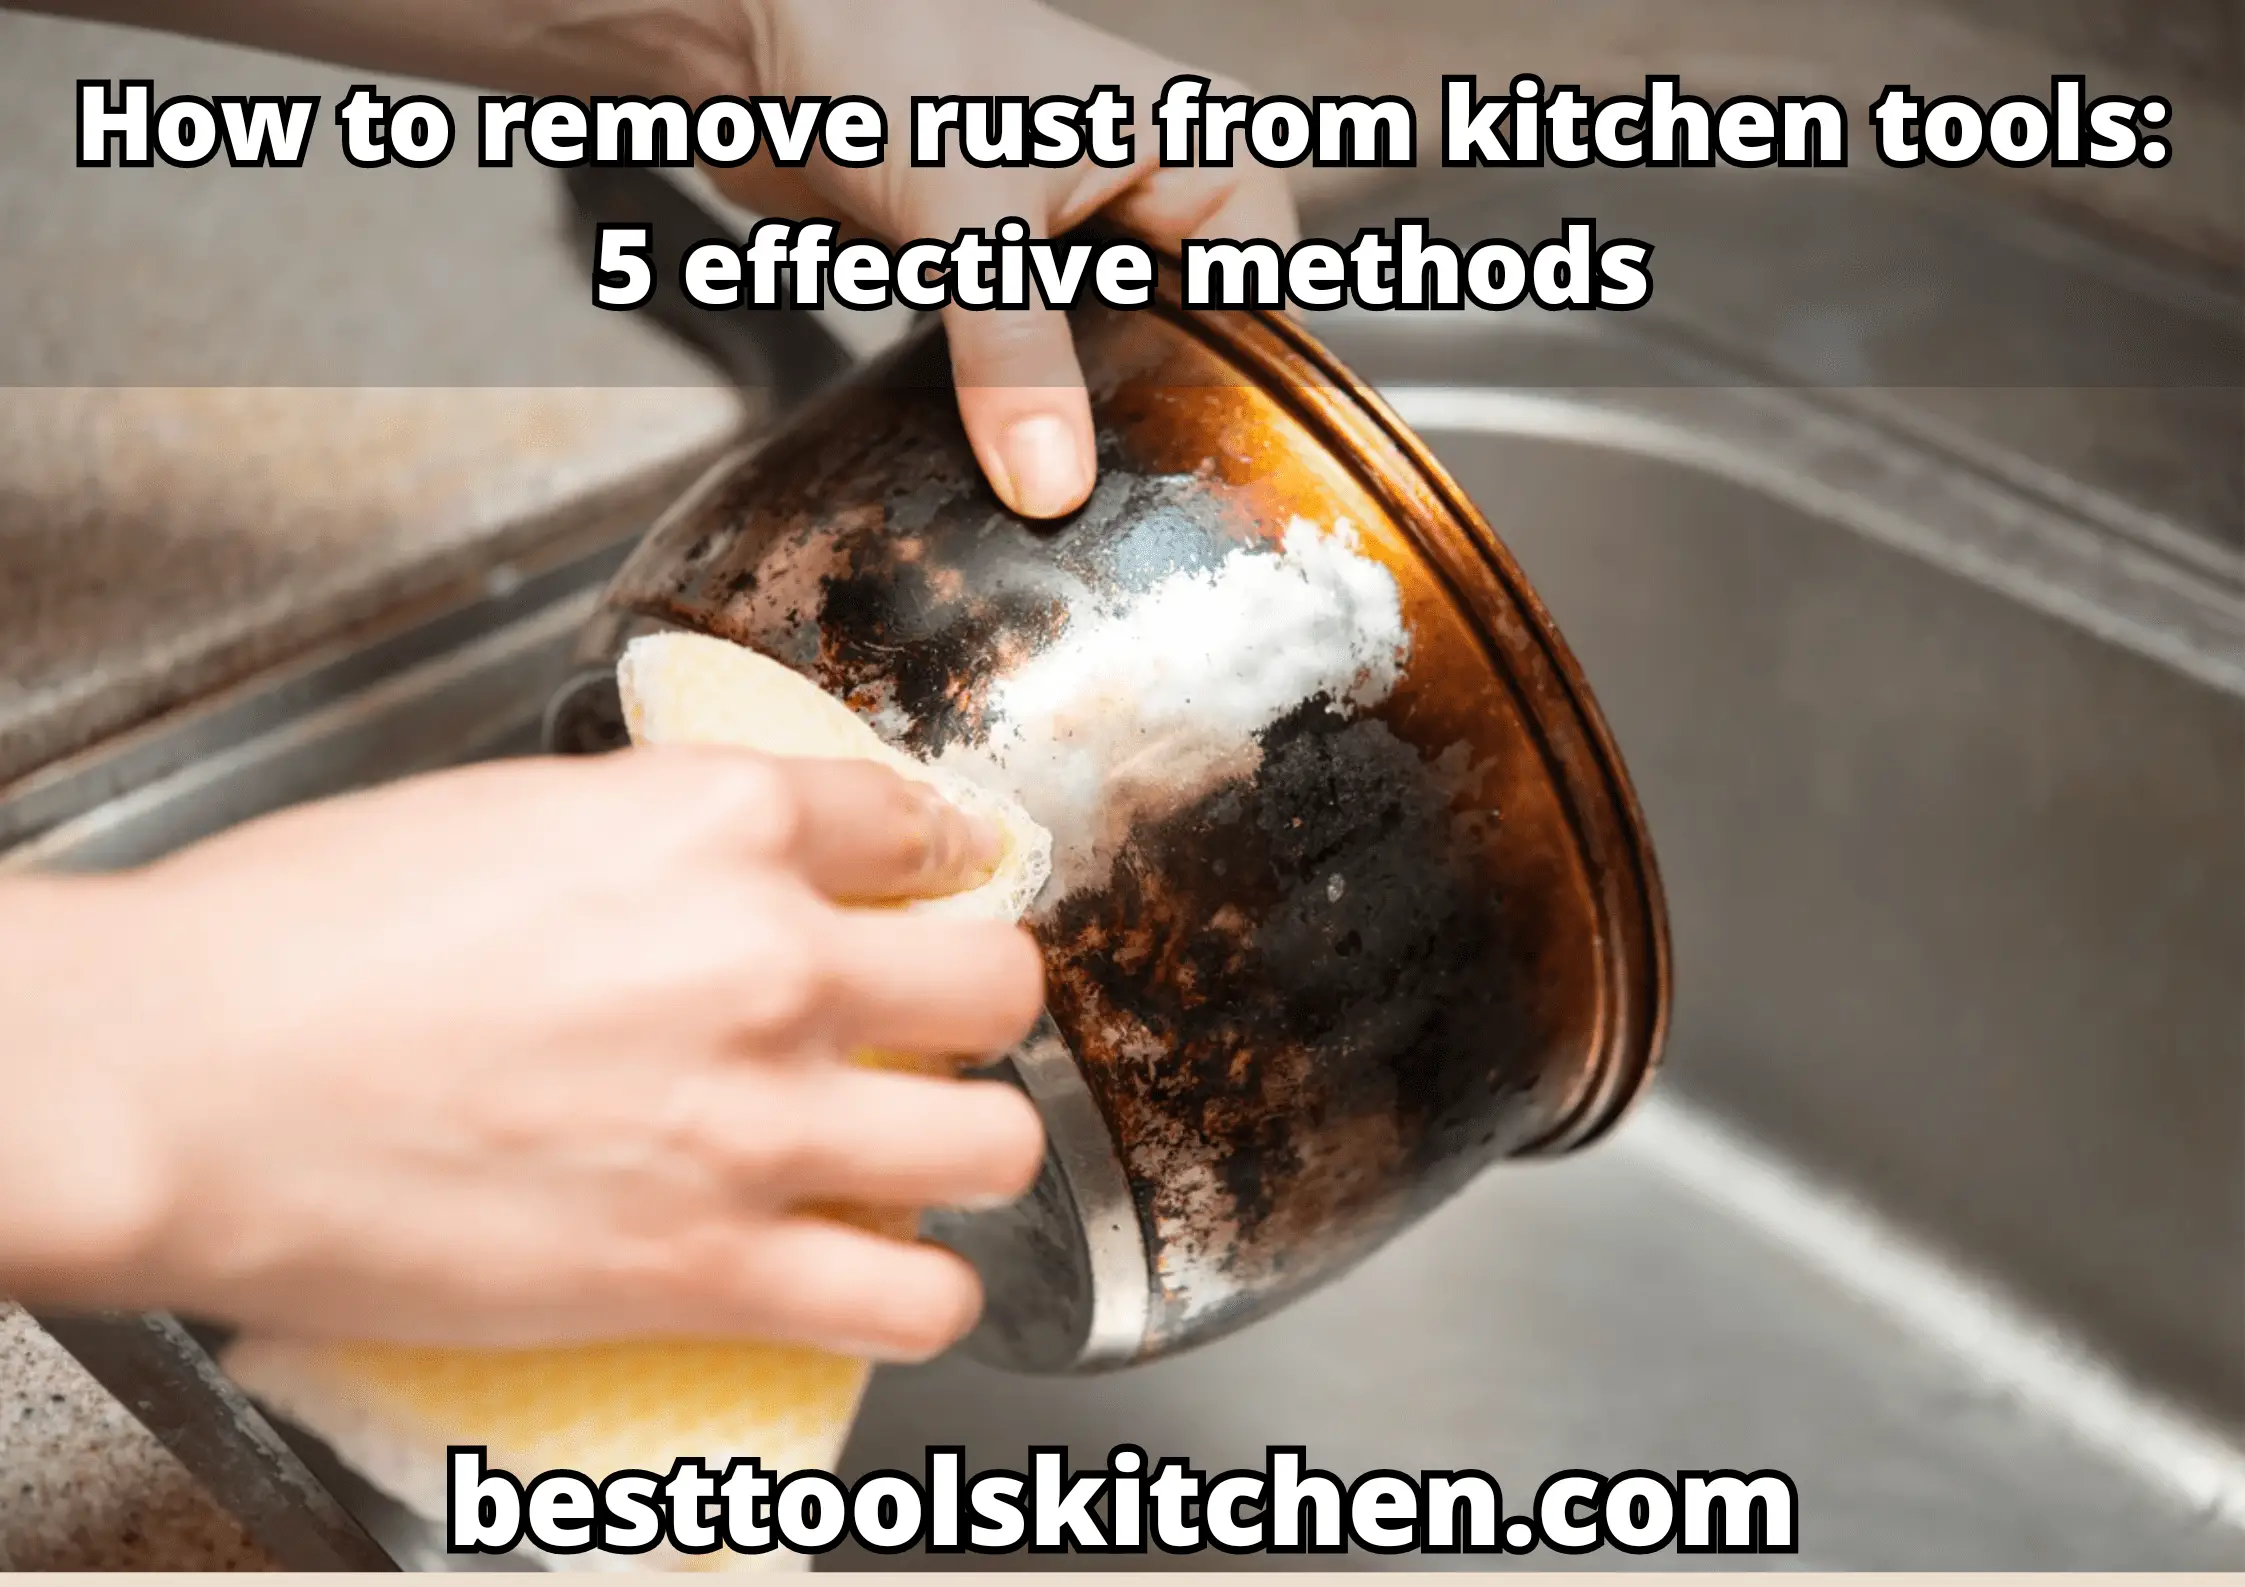 How to remove rust from kitchen tools